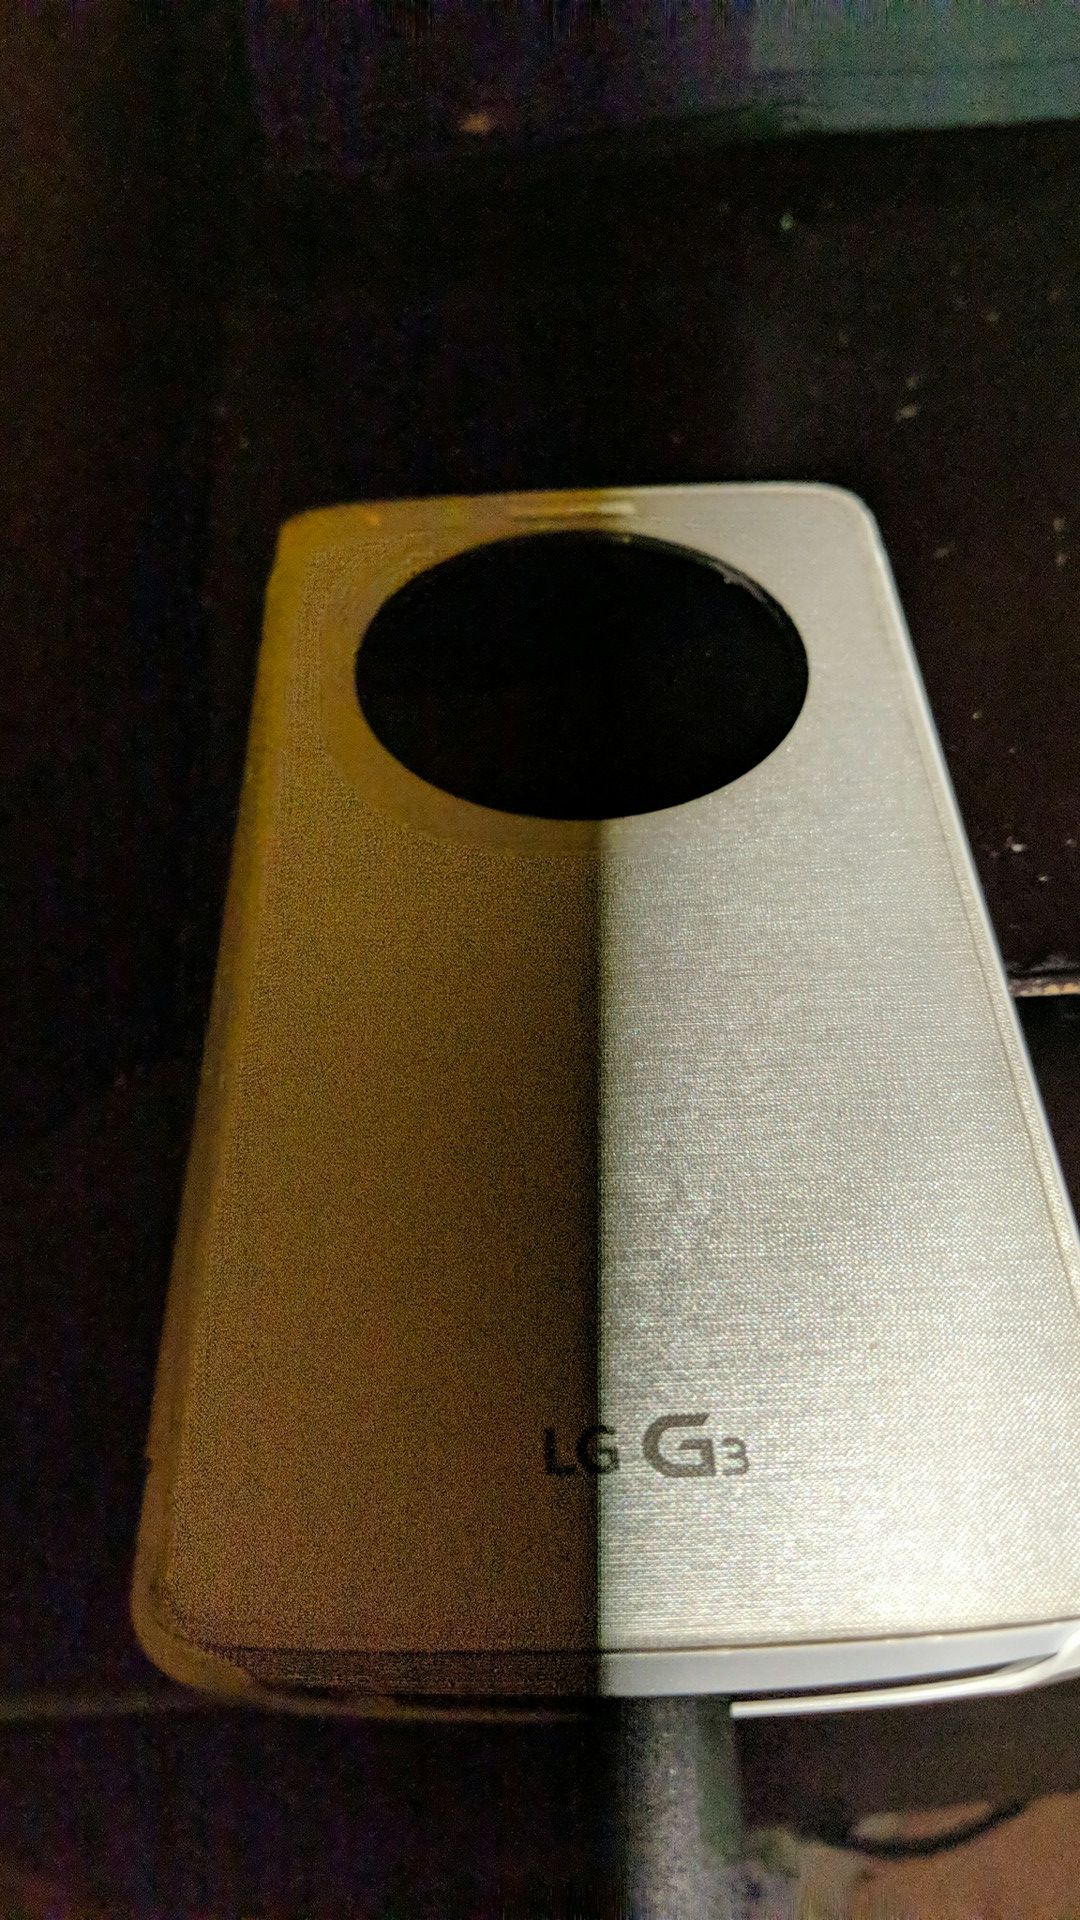 Lg 3 cell phone